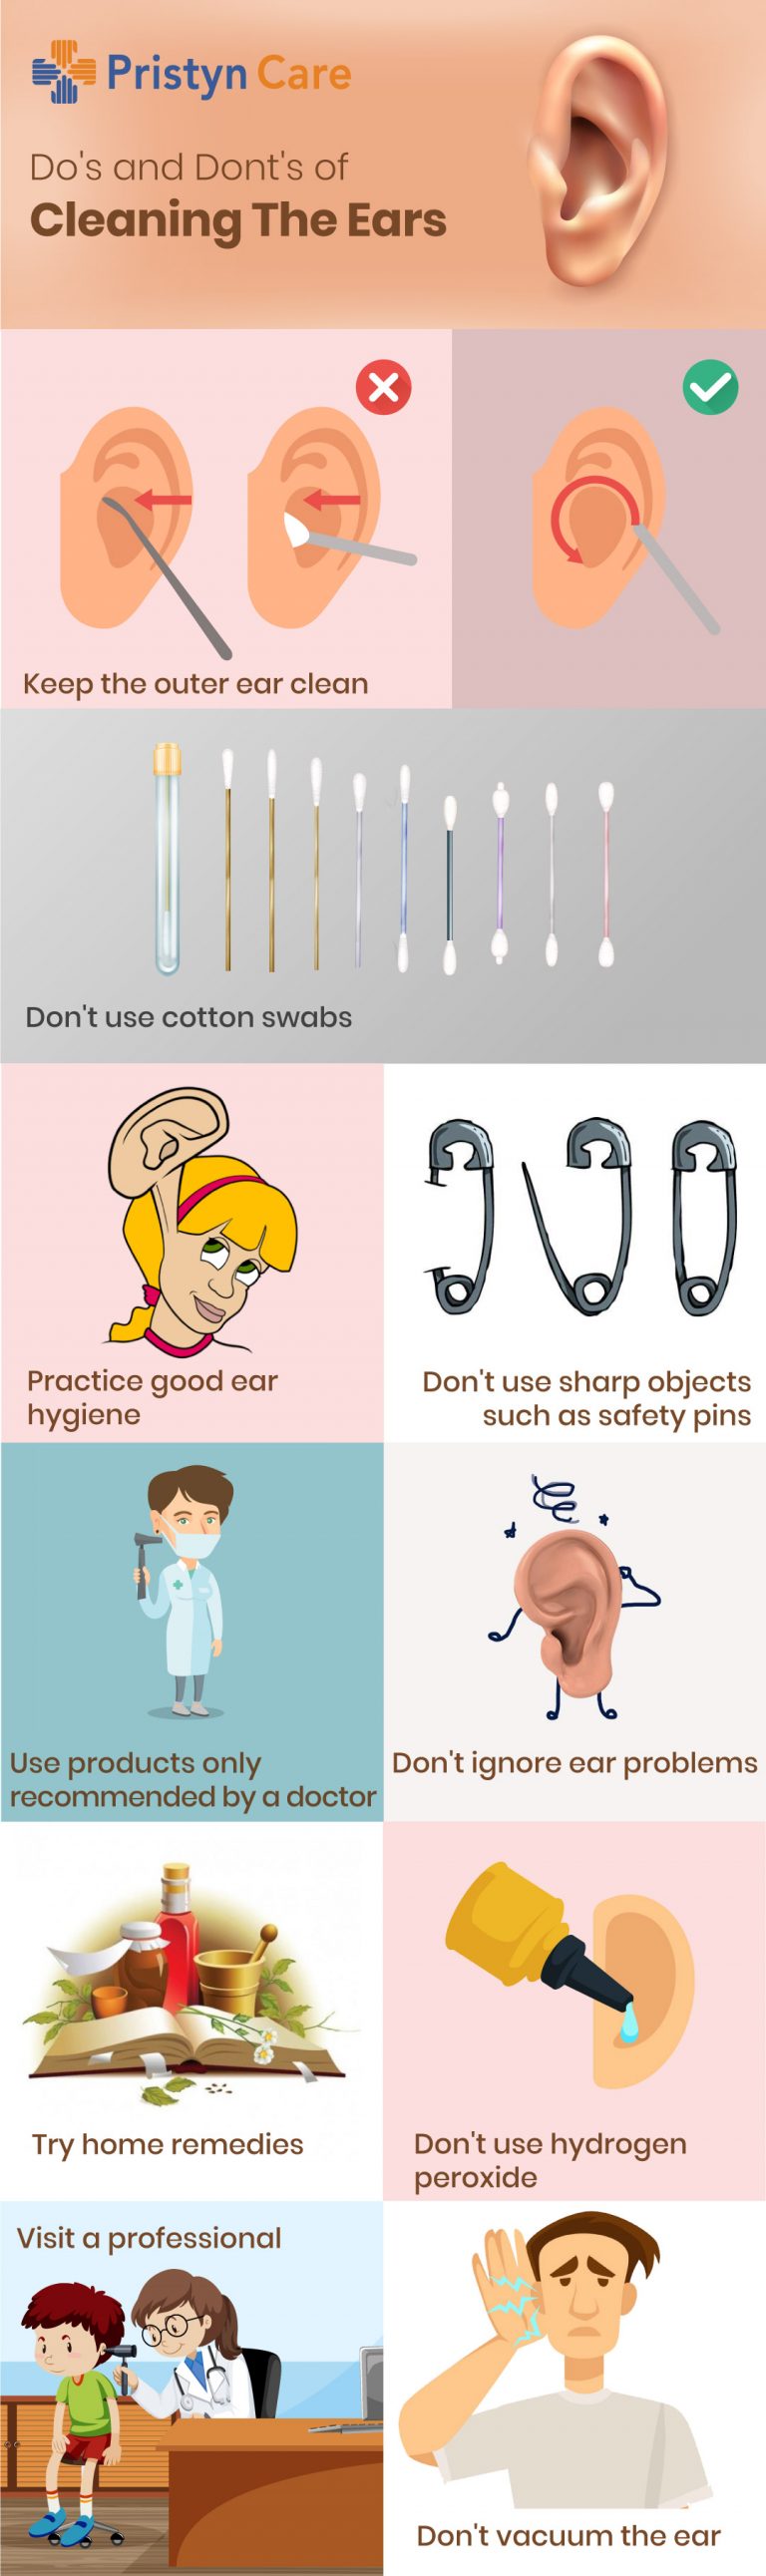 Know The Dos And Donts To Clean Your Ears Pristyn Care 